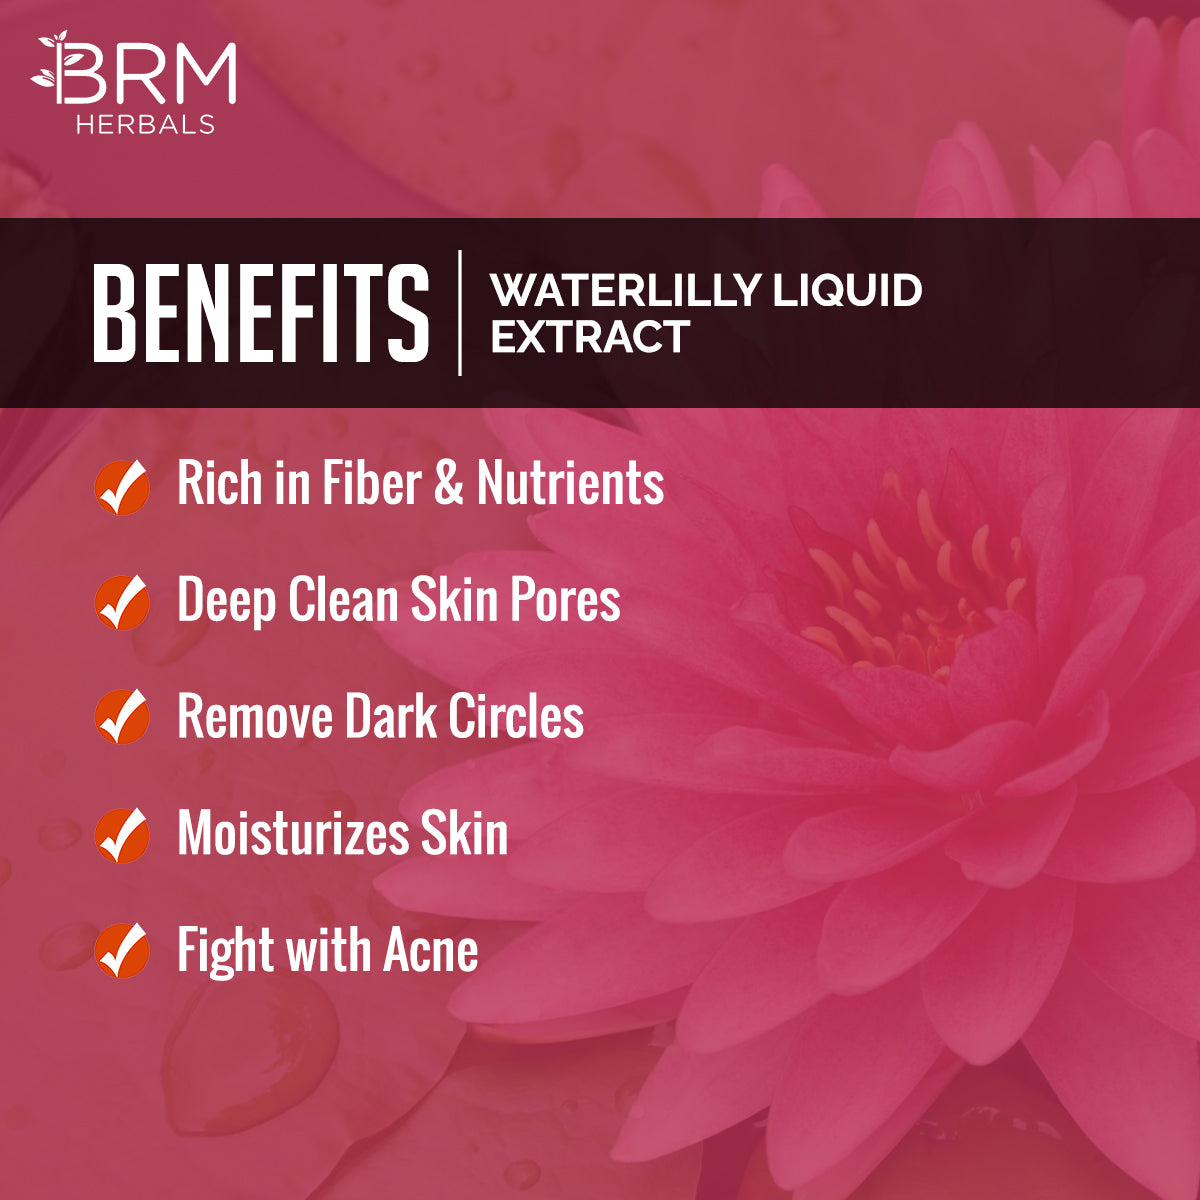 Waterlily Liquid Extract Water soluble